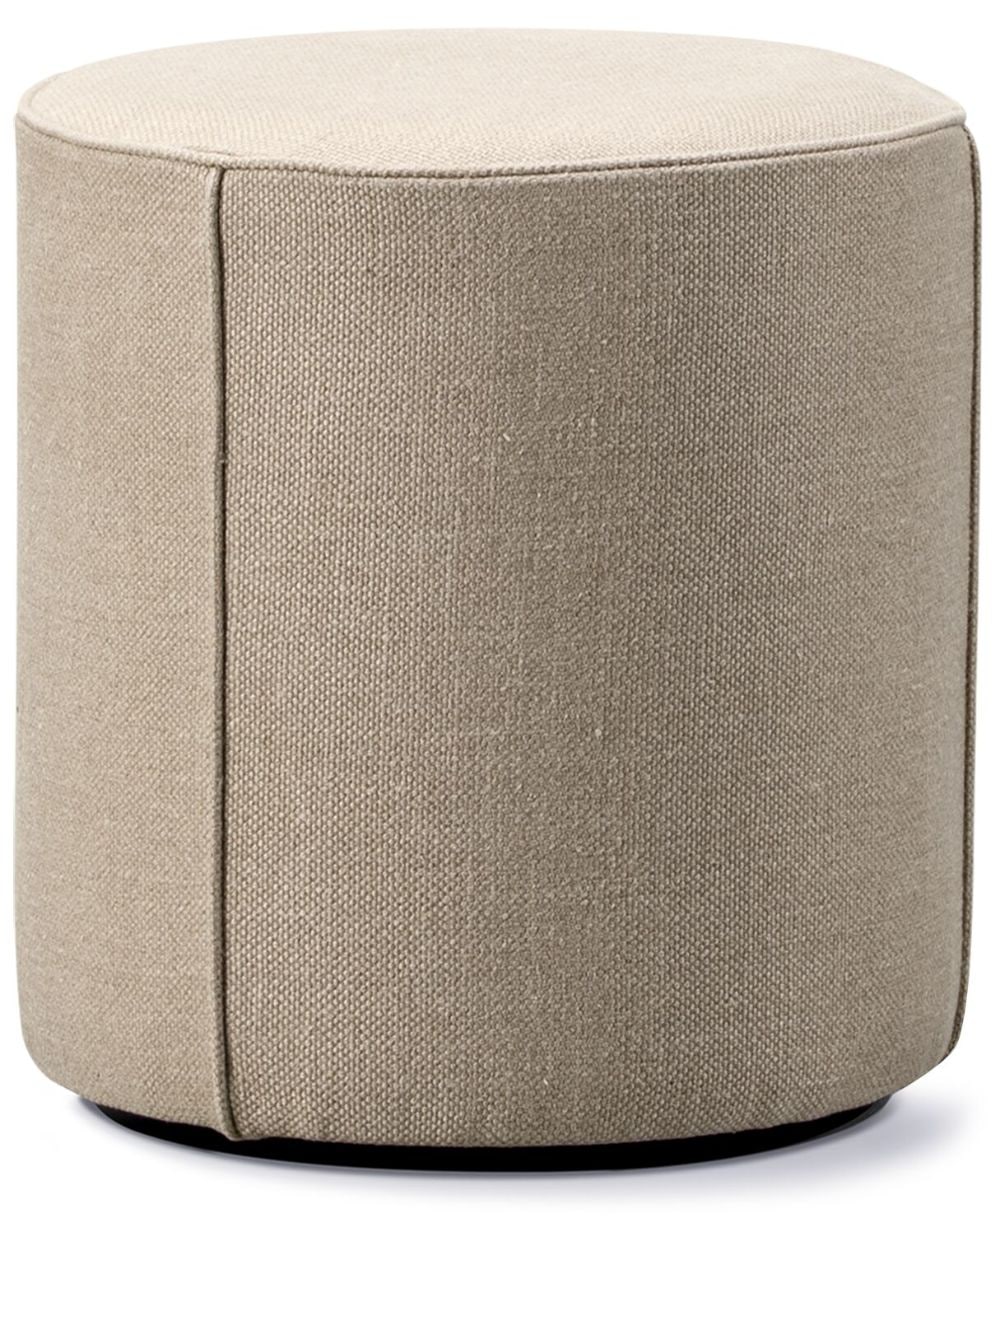 Fredericia Furniture Mono Cylinder Pouf In Beige